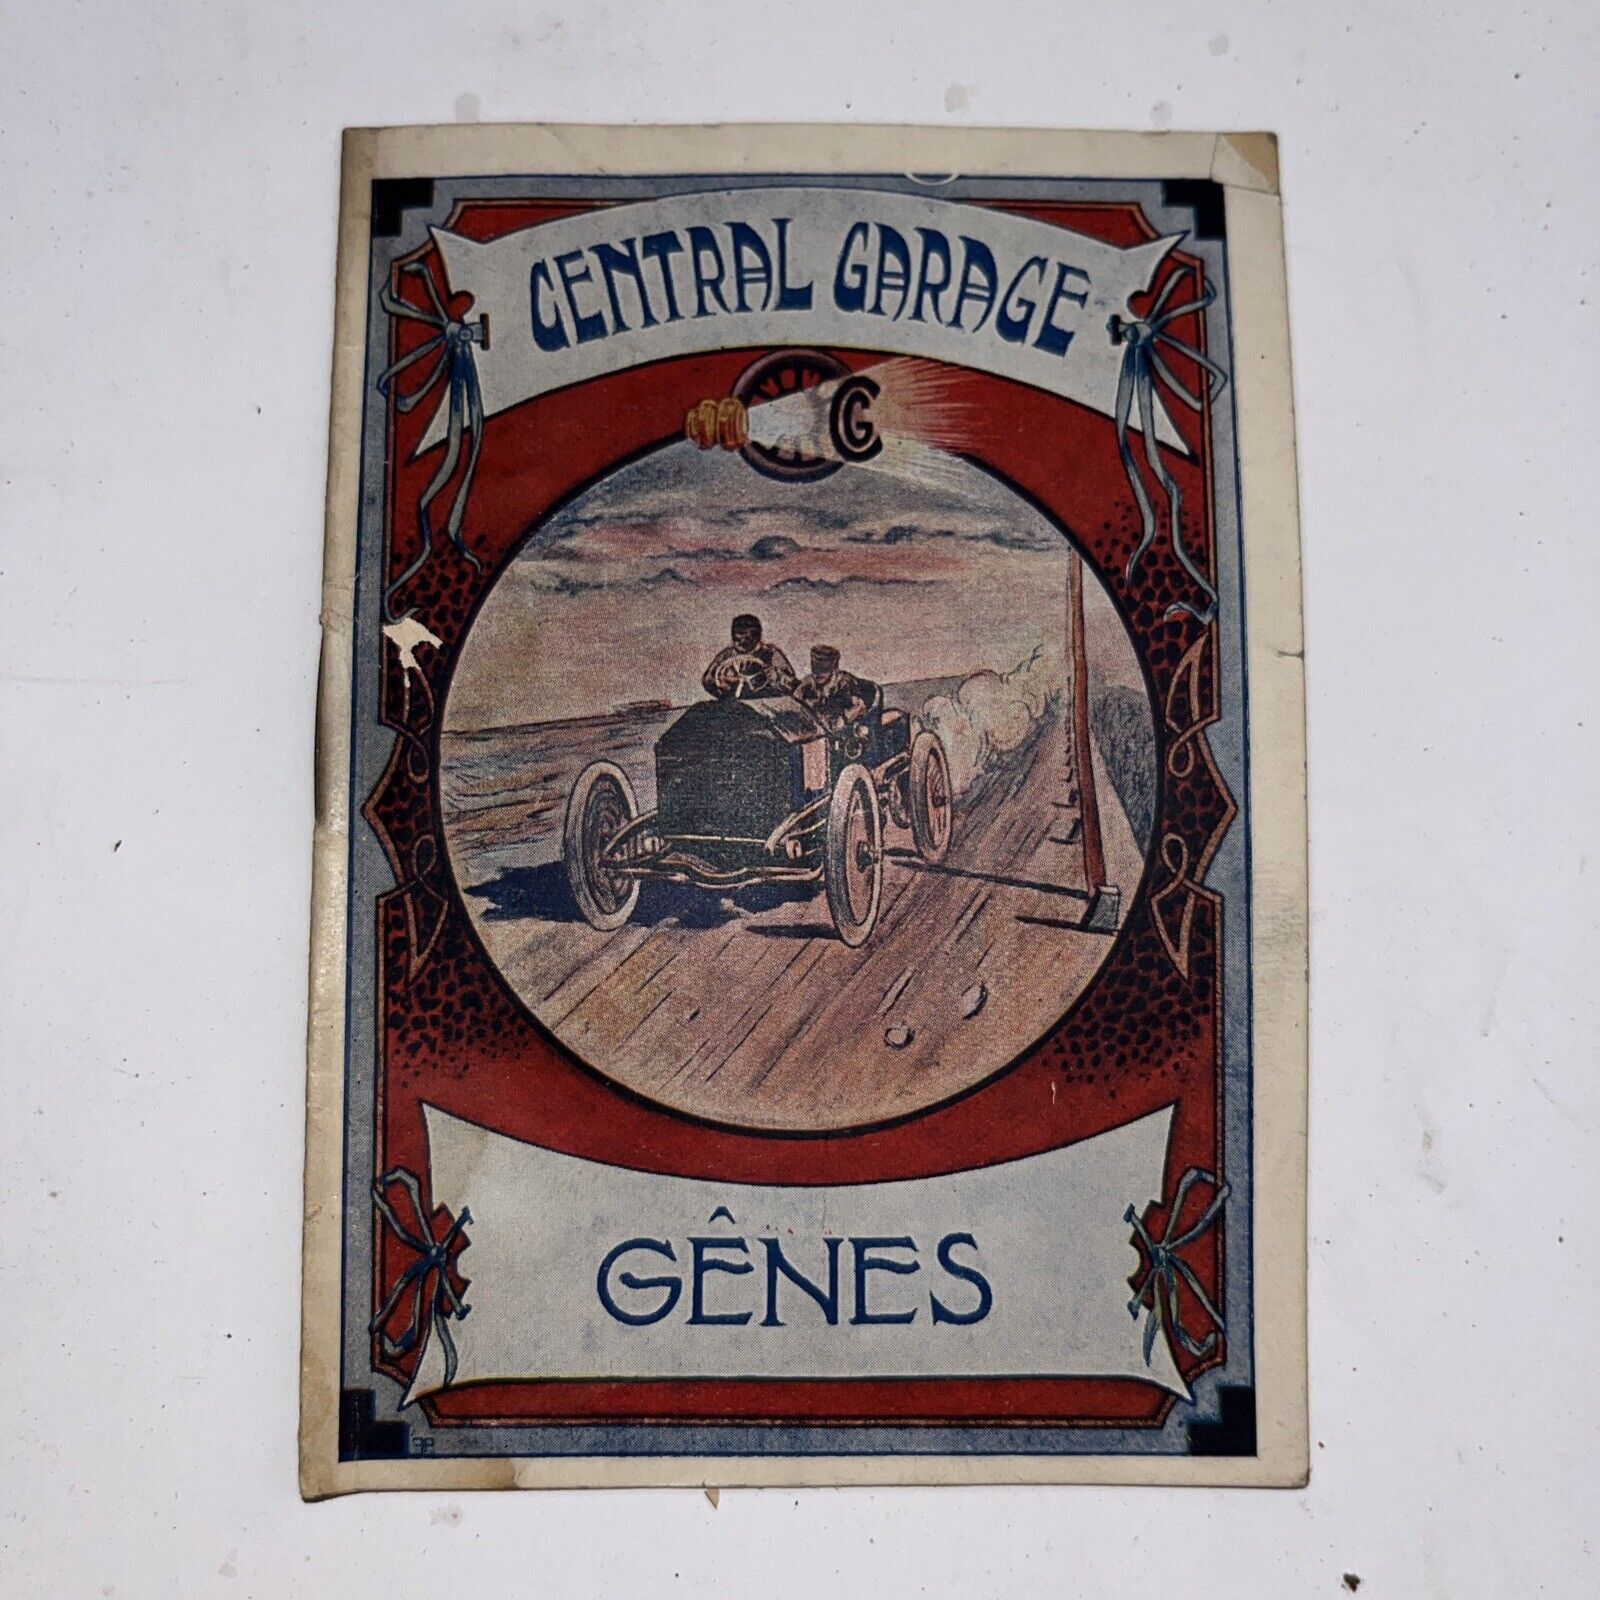 Antique Central Garage Gênes Genoa Italy - Instruction for Motorcars w Map